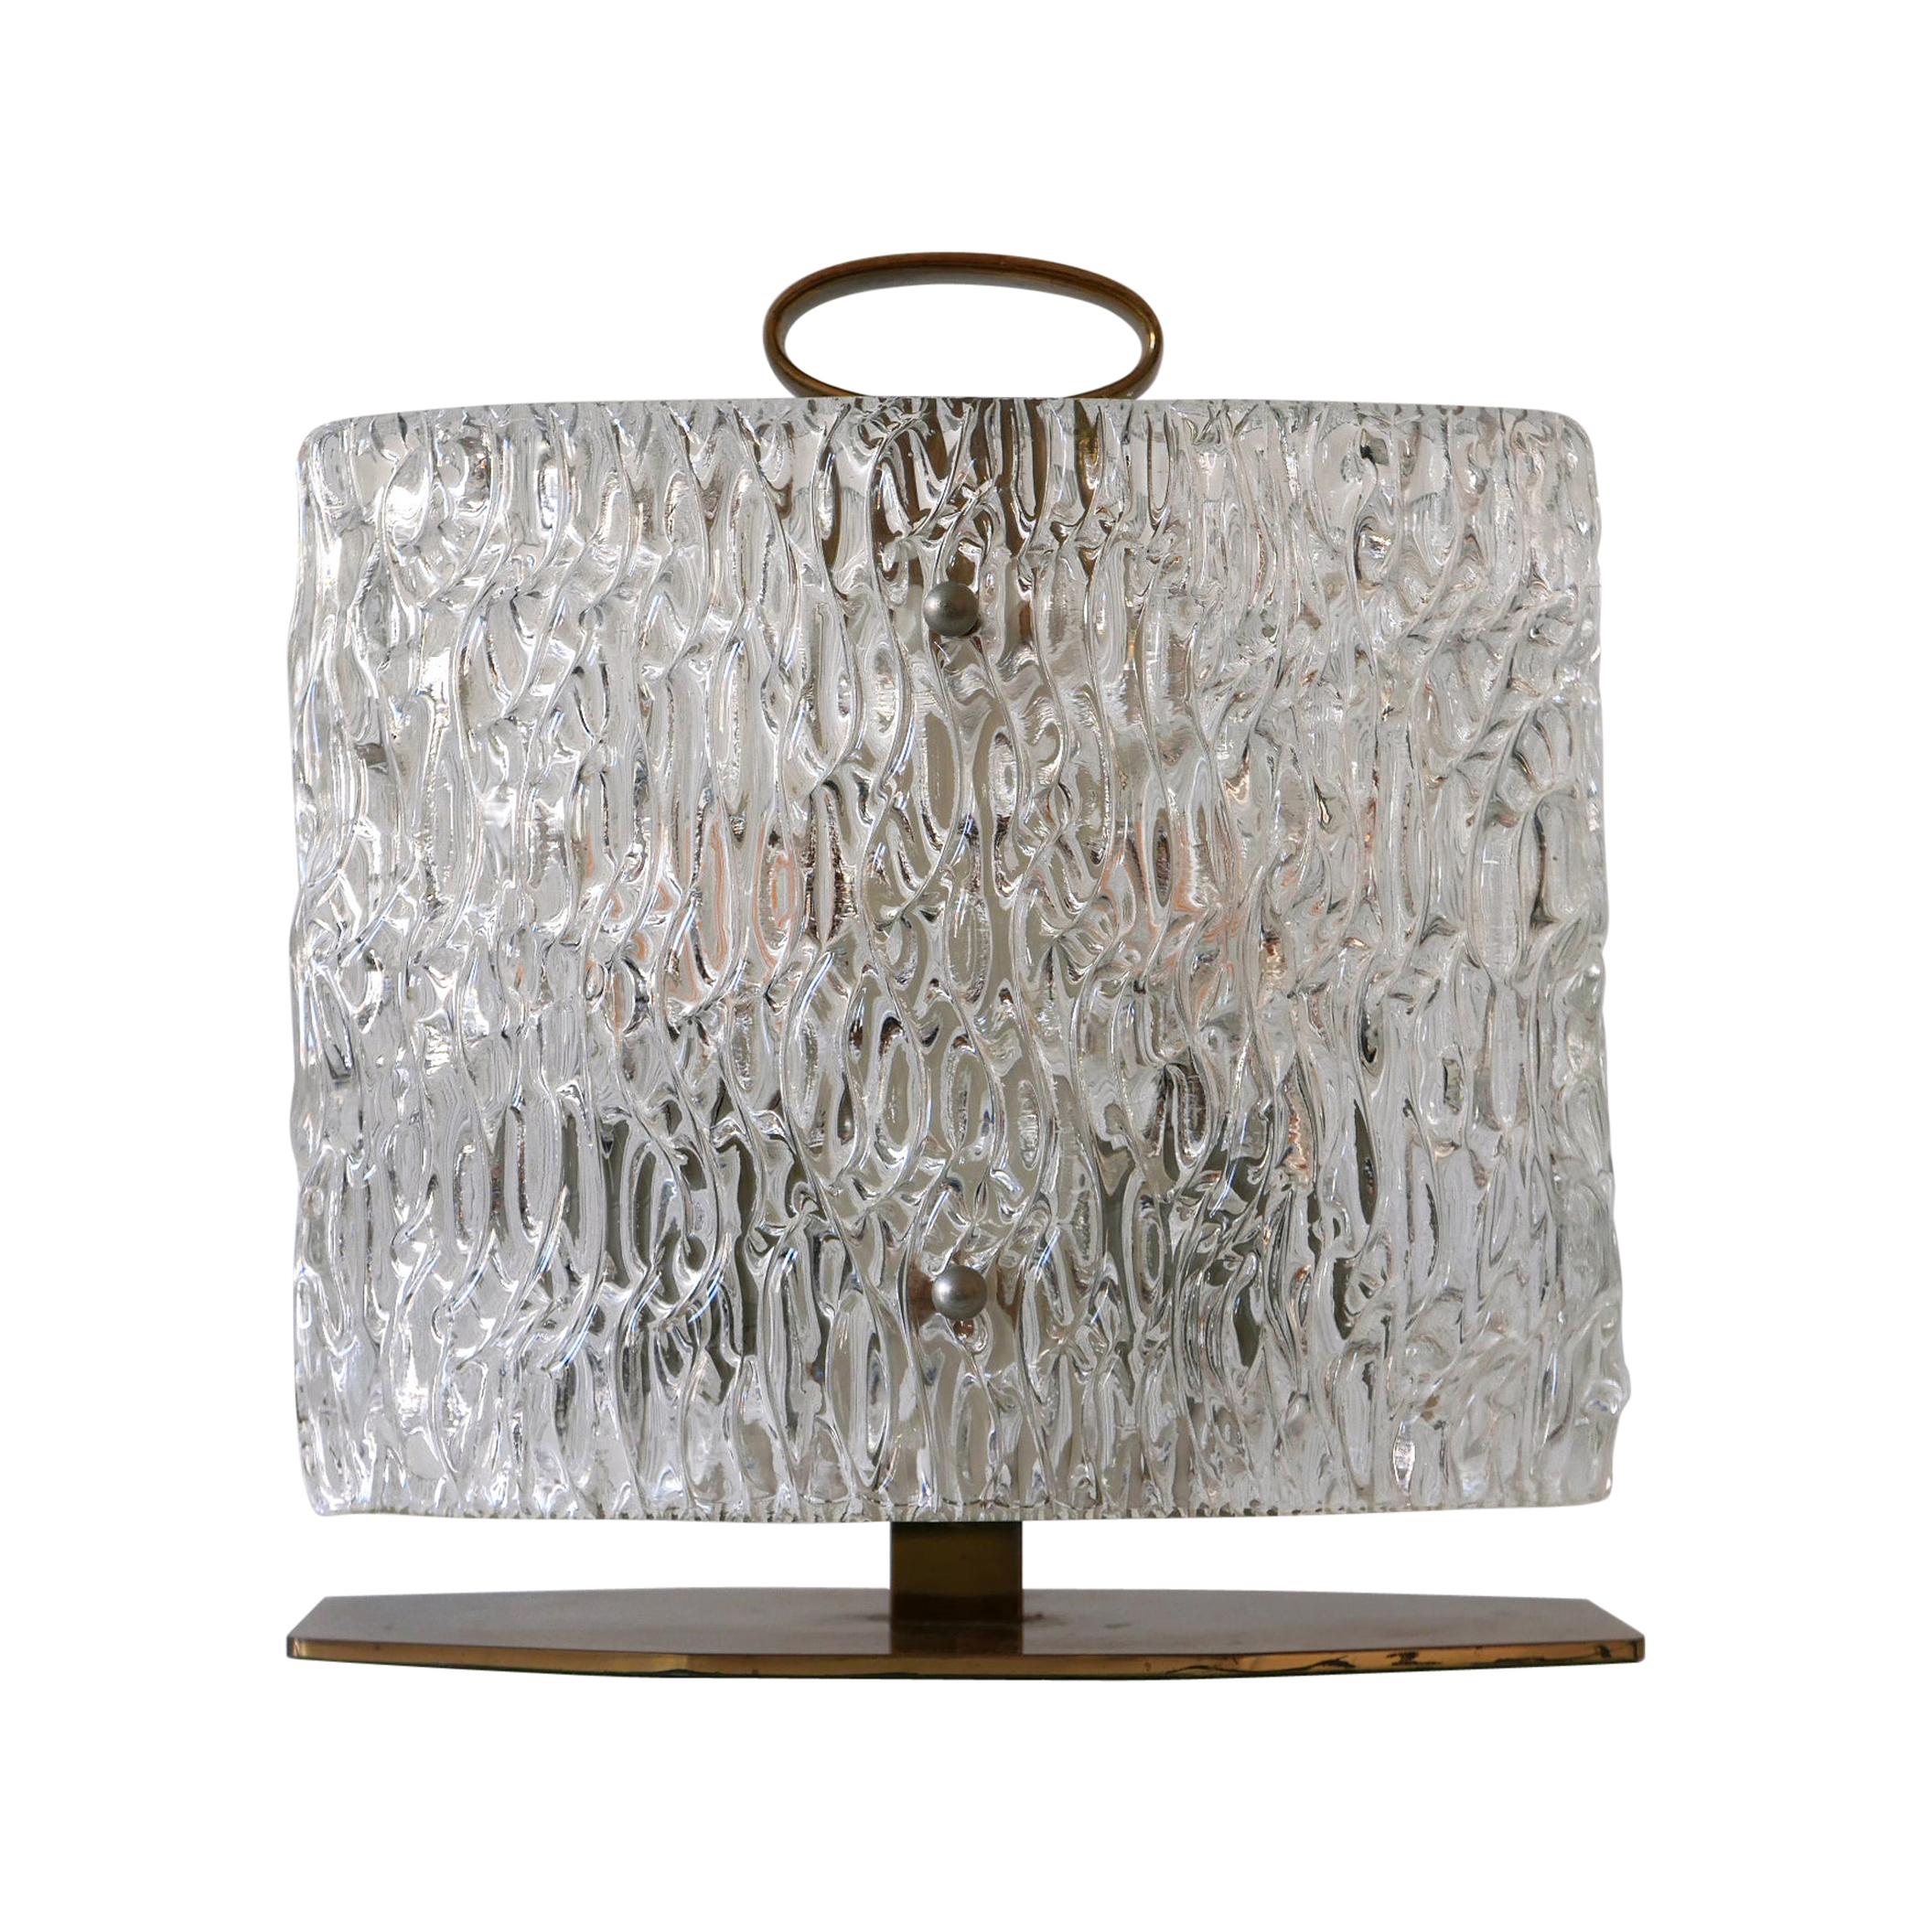 Exceptional Mid-Century Modern Table Lamp with Ice Glass Shade, 1950s, Italy